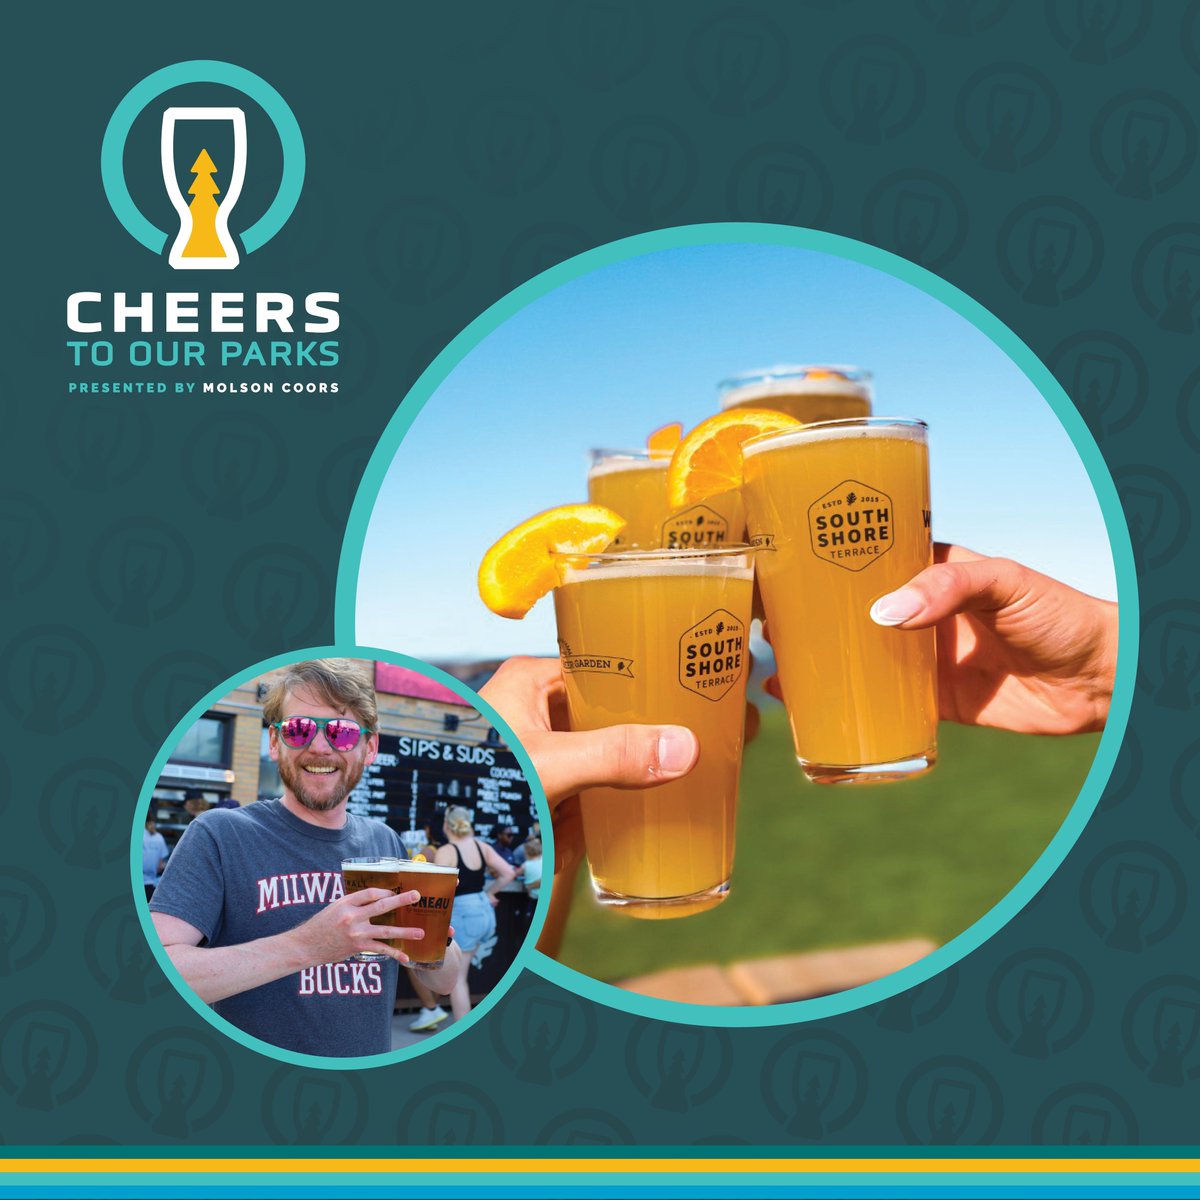 Join us, @MolsonCoors and Milwaukee Parks Foundation for the launch of #CheerstoOurParks today at South Shore Terrace as we celebrate our green spaces. Bring friends and grab a cold one in Milwaukee! 🍻 For more information visit: buff.ly/3J3lA2p